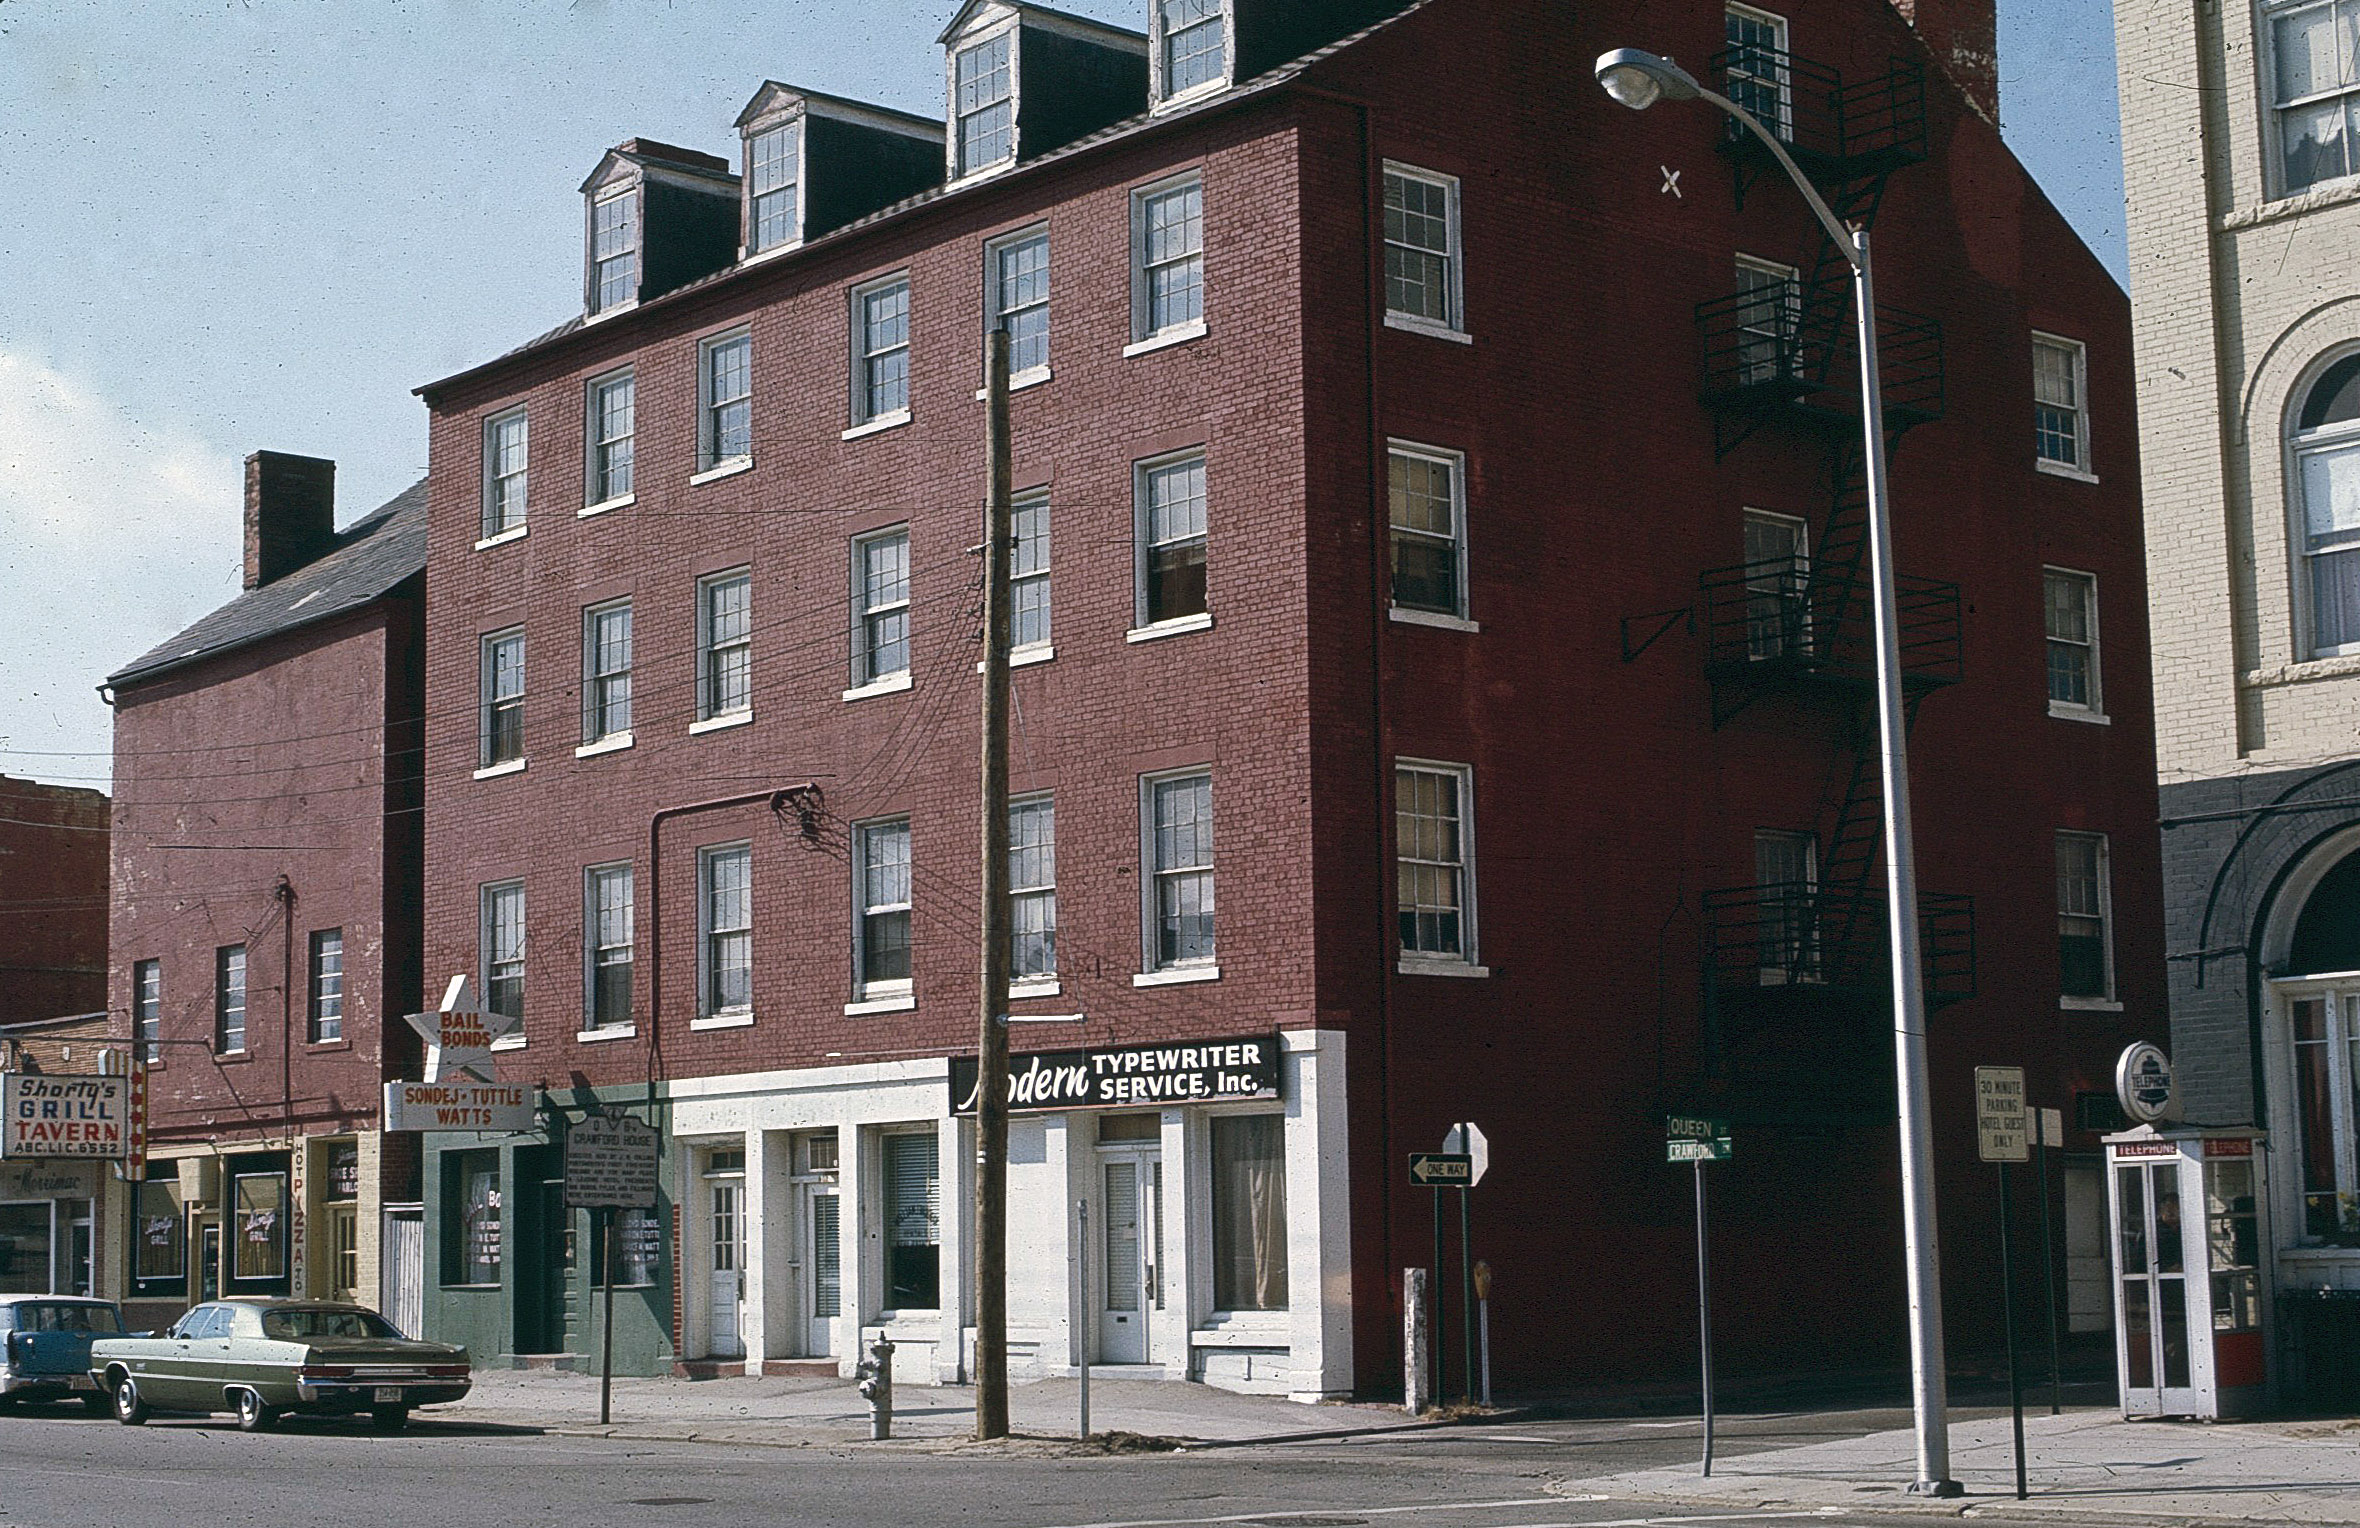 124-0026_Crawford_House_Hotel_1970_exterior_view_color